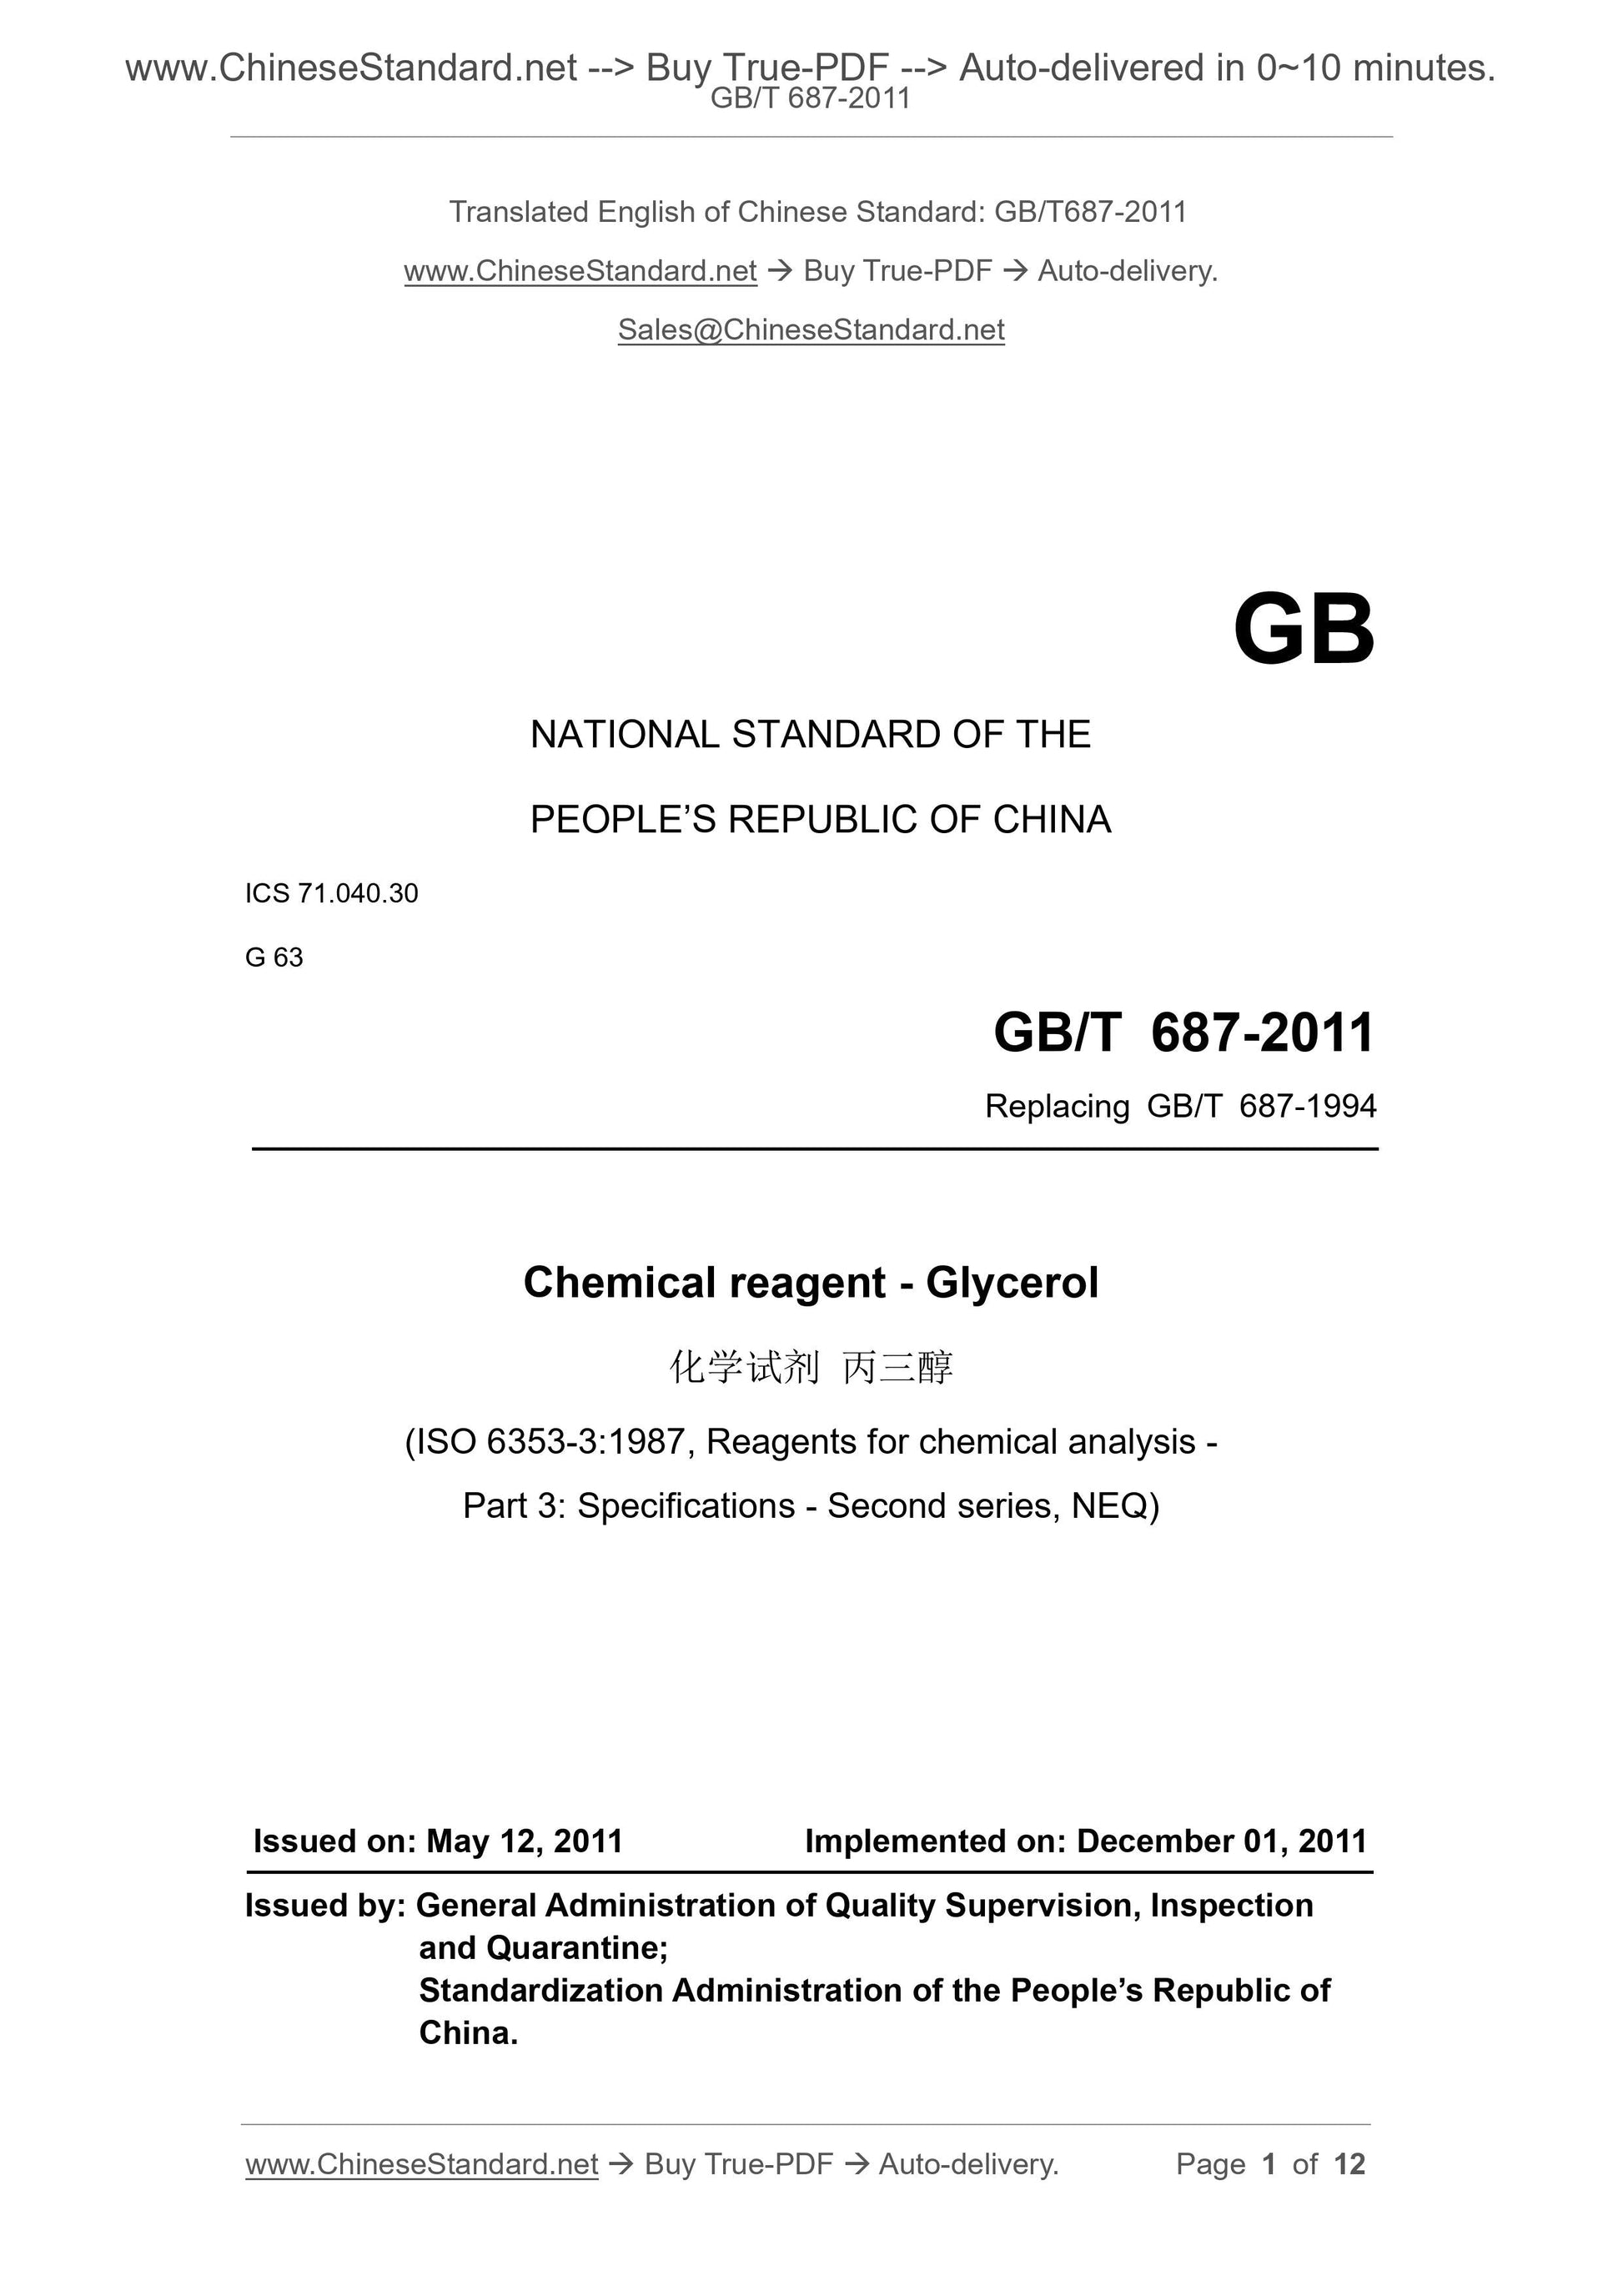 GB/T 687-2011 Page 1